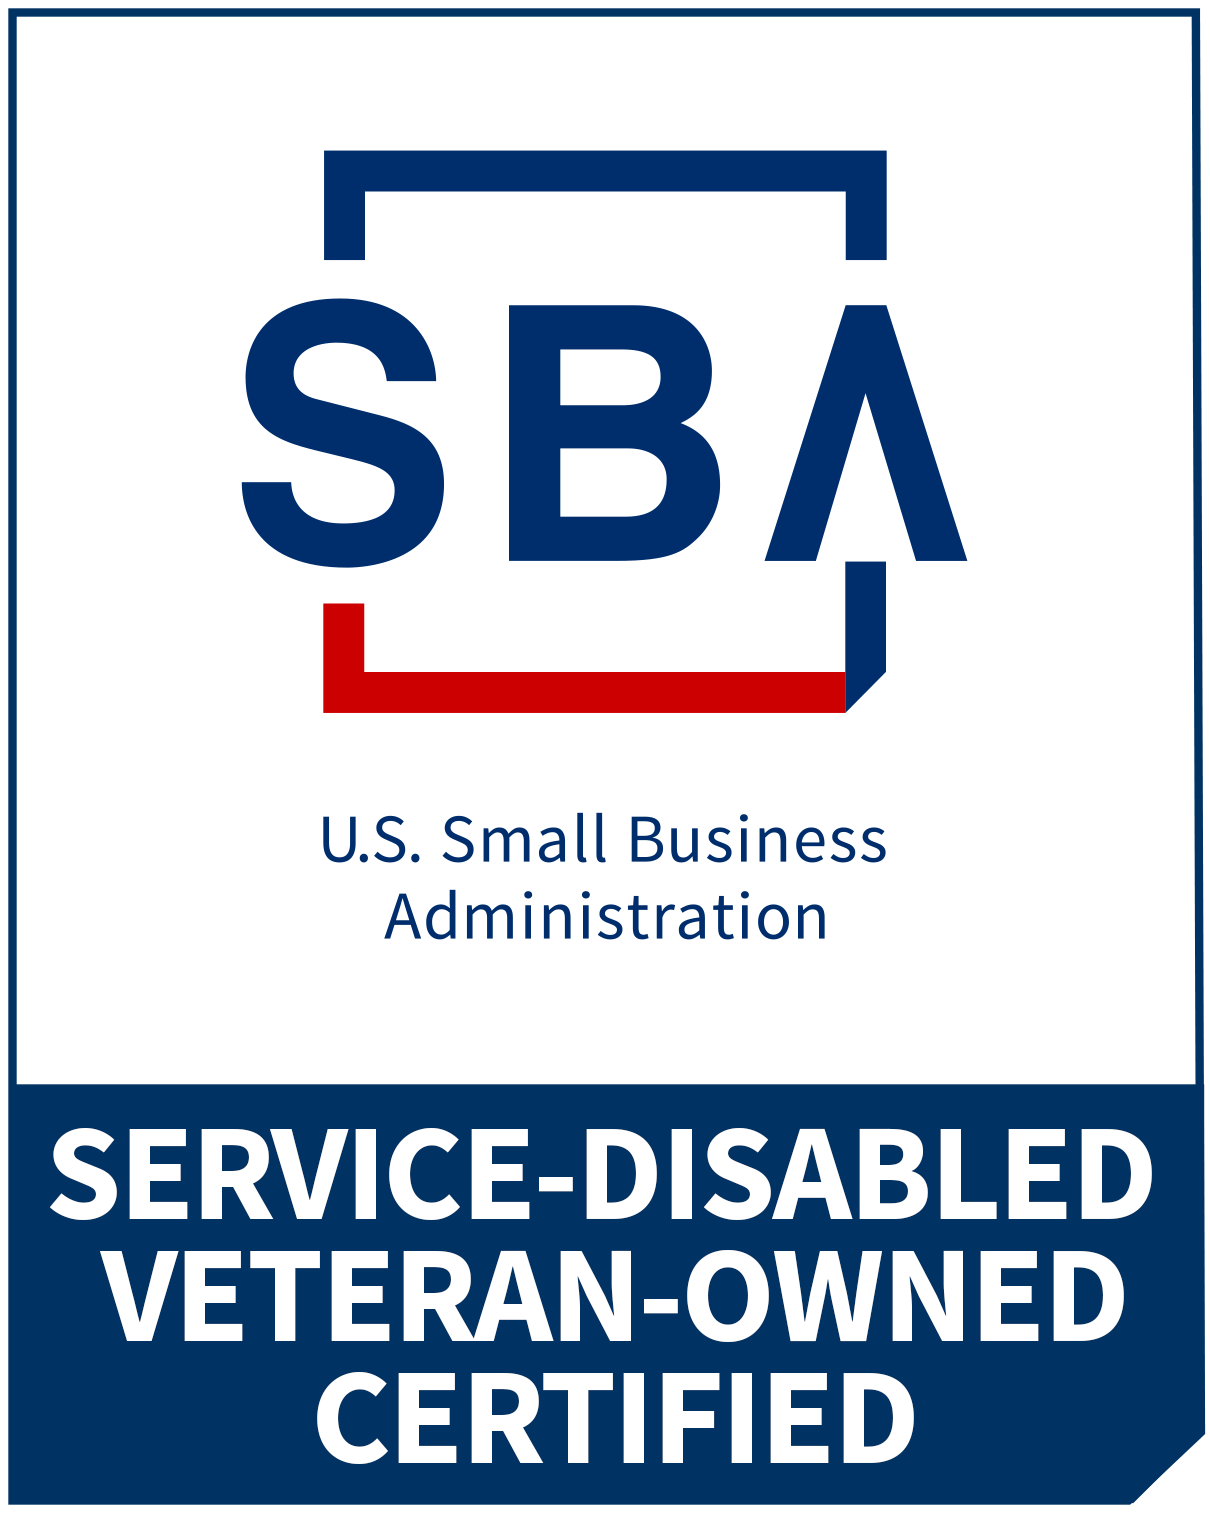 360 elevated service-disabled veteran-owned certified by united stated small business adminstration.